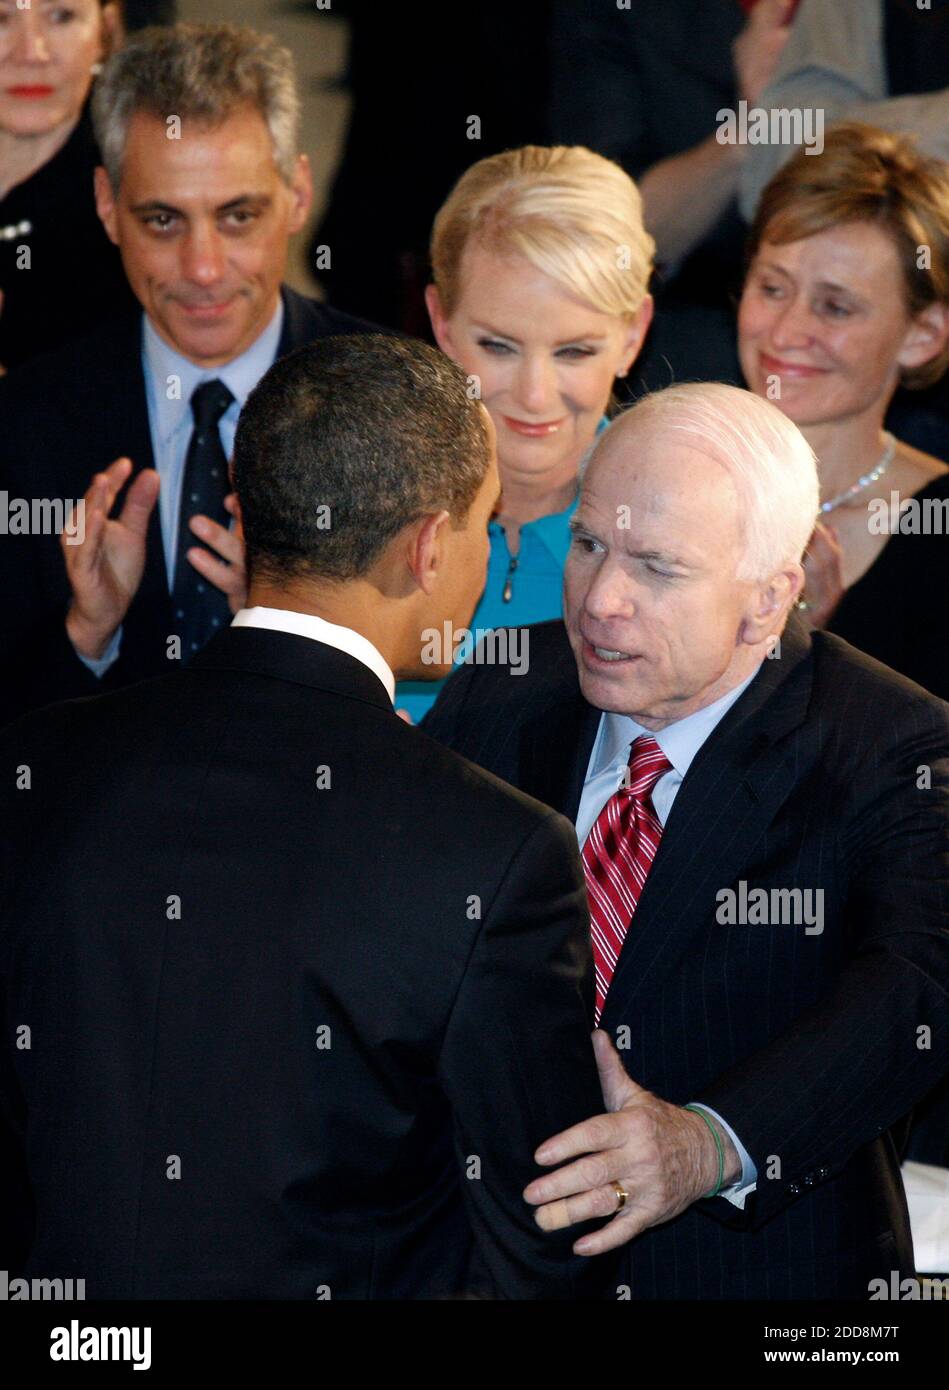 NO FILM, NO VIDEO, NO TV, NO DOCUMENTARY - President Barack Obama, left, greets his former campaign opponent Sen. John McCain (R-AZ.) as Obama's Chief of Staff, Rahm Emmanuel and Cindy McCain look on, in Statutory Hall at the U.S. Capitol in Washington, D.C., USA, on Tuesday, January 20, 2009. Photo by Harry Hamburg/Pool/MCT/ABACAPRESS.COM Stock Photo